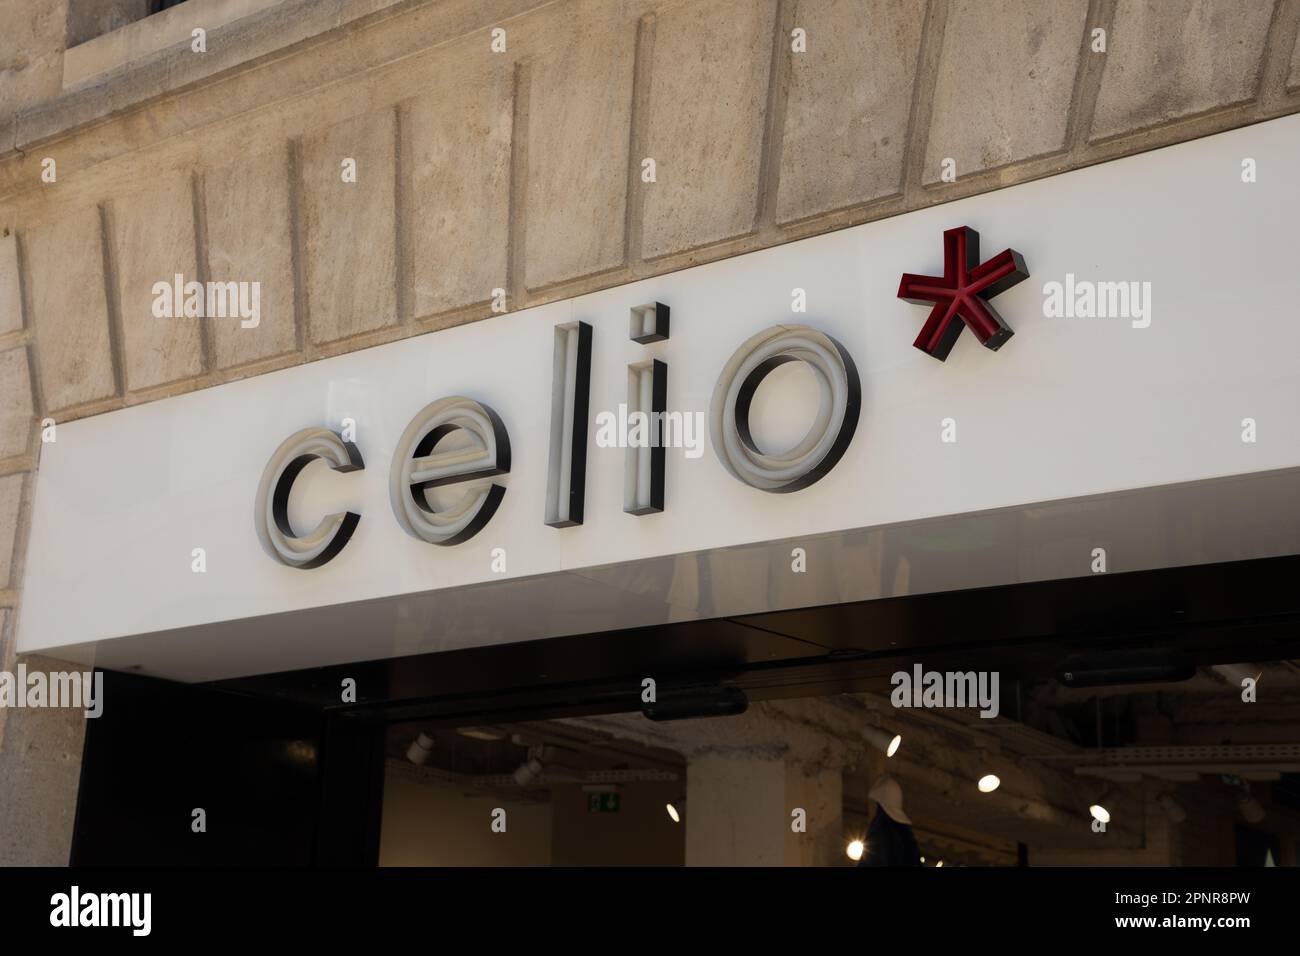 Bordeaux , Aquitaine France - 04 17 2023 : celio asterisk red cross sign  brand and text logo facade men clothing store entrance chain Stock Photo -  Alamy